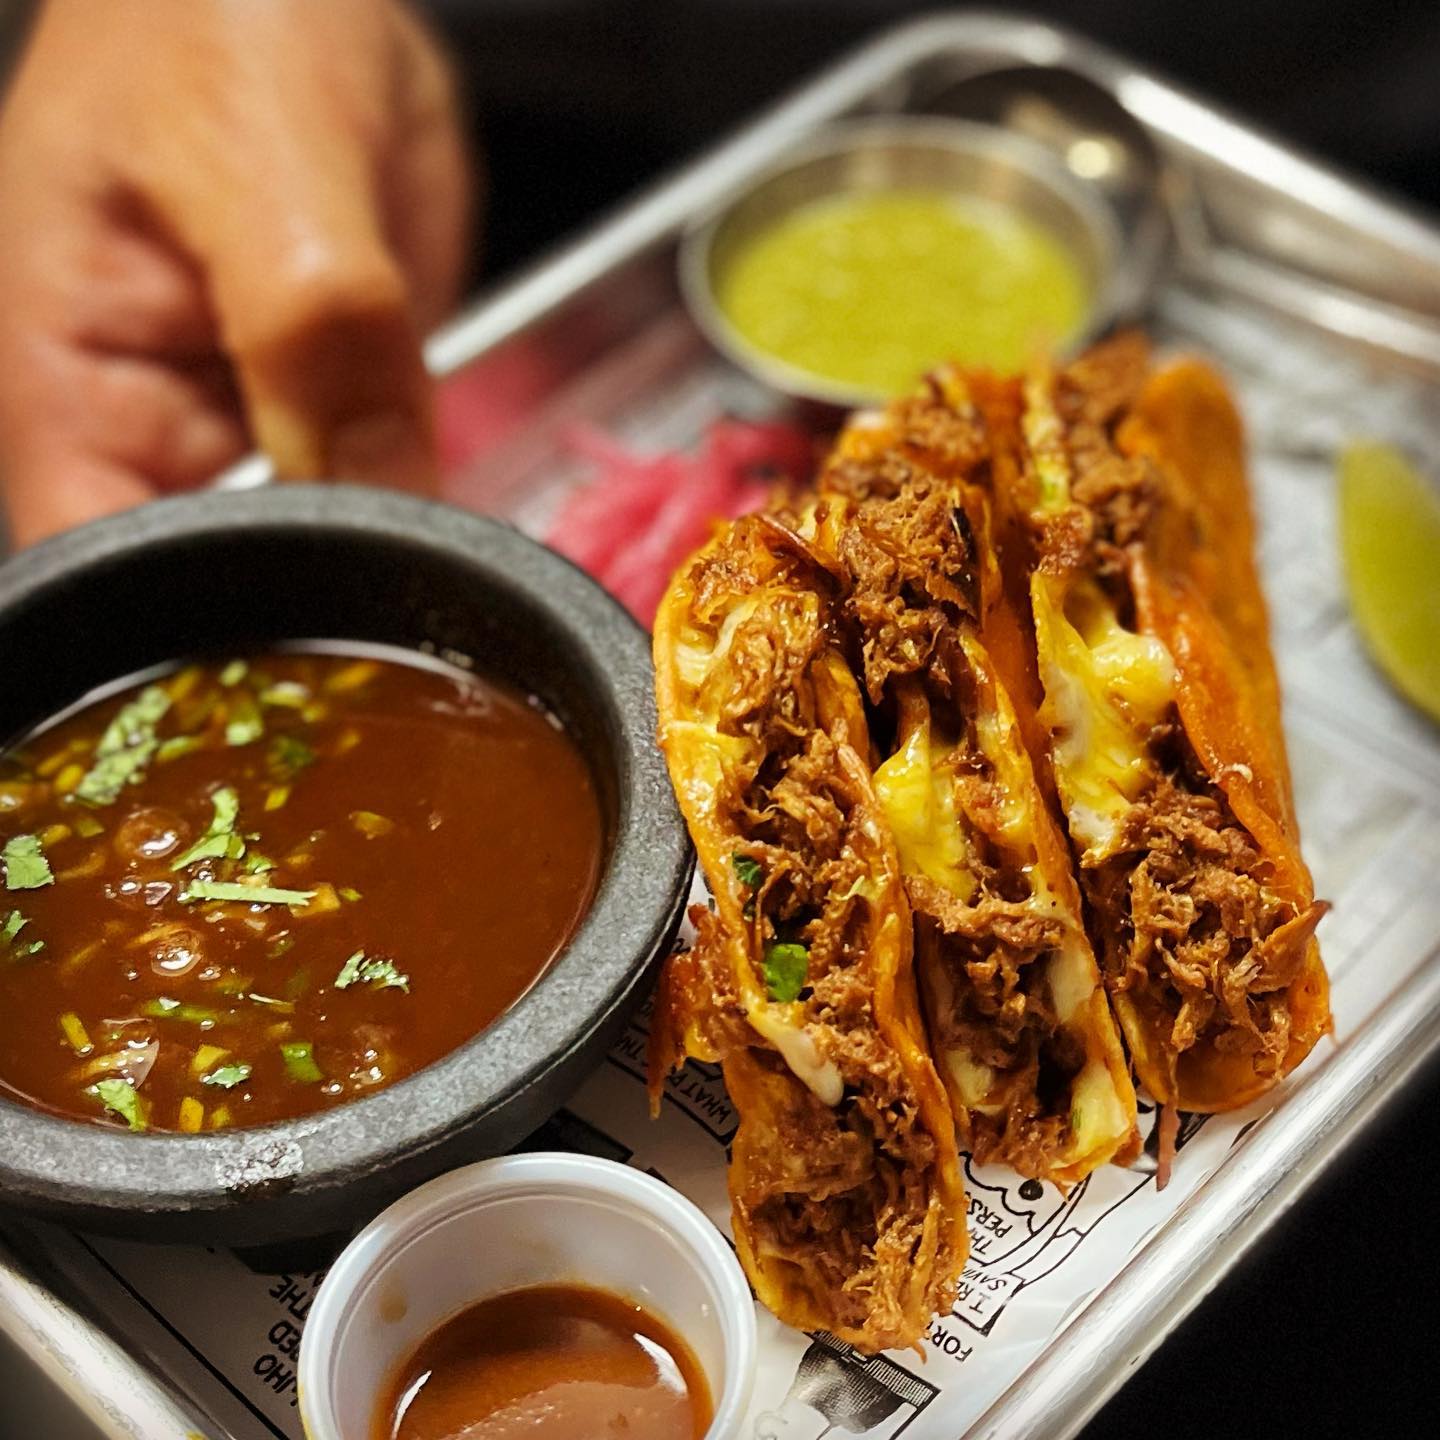 a hand holding a metal, newspaper-lined tray of three yellow-cheese-laced, chicken quesabirria crispy tacos with a side of deep brown, cilantro and scallion-flecked sauce.